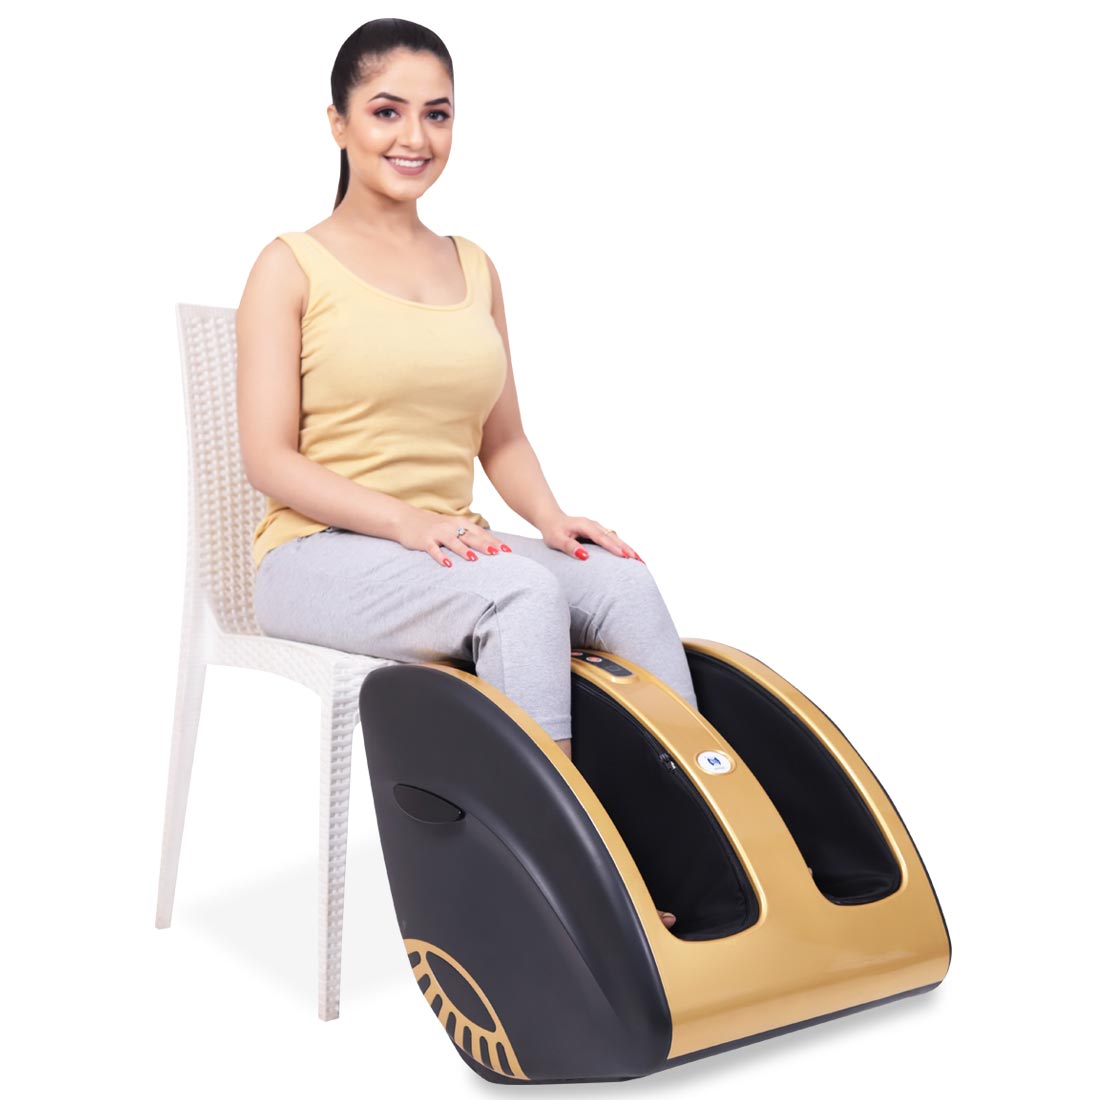 foot and leg massager india